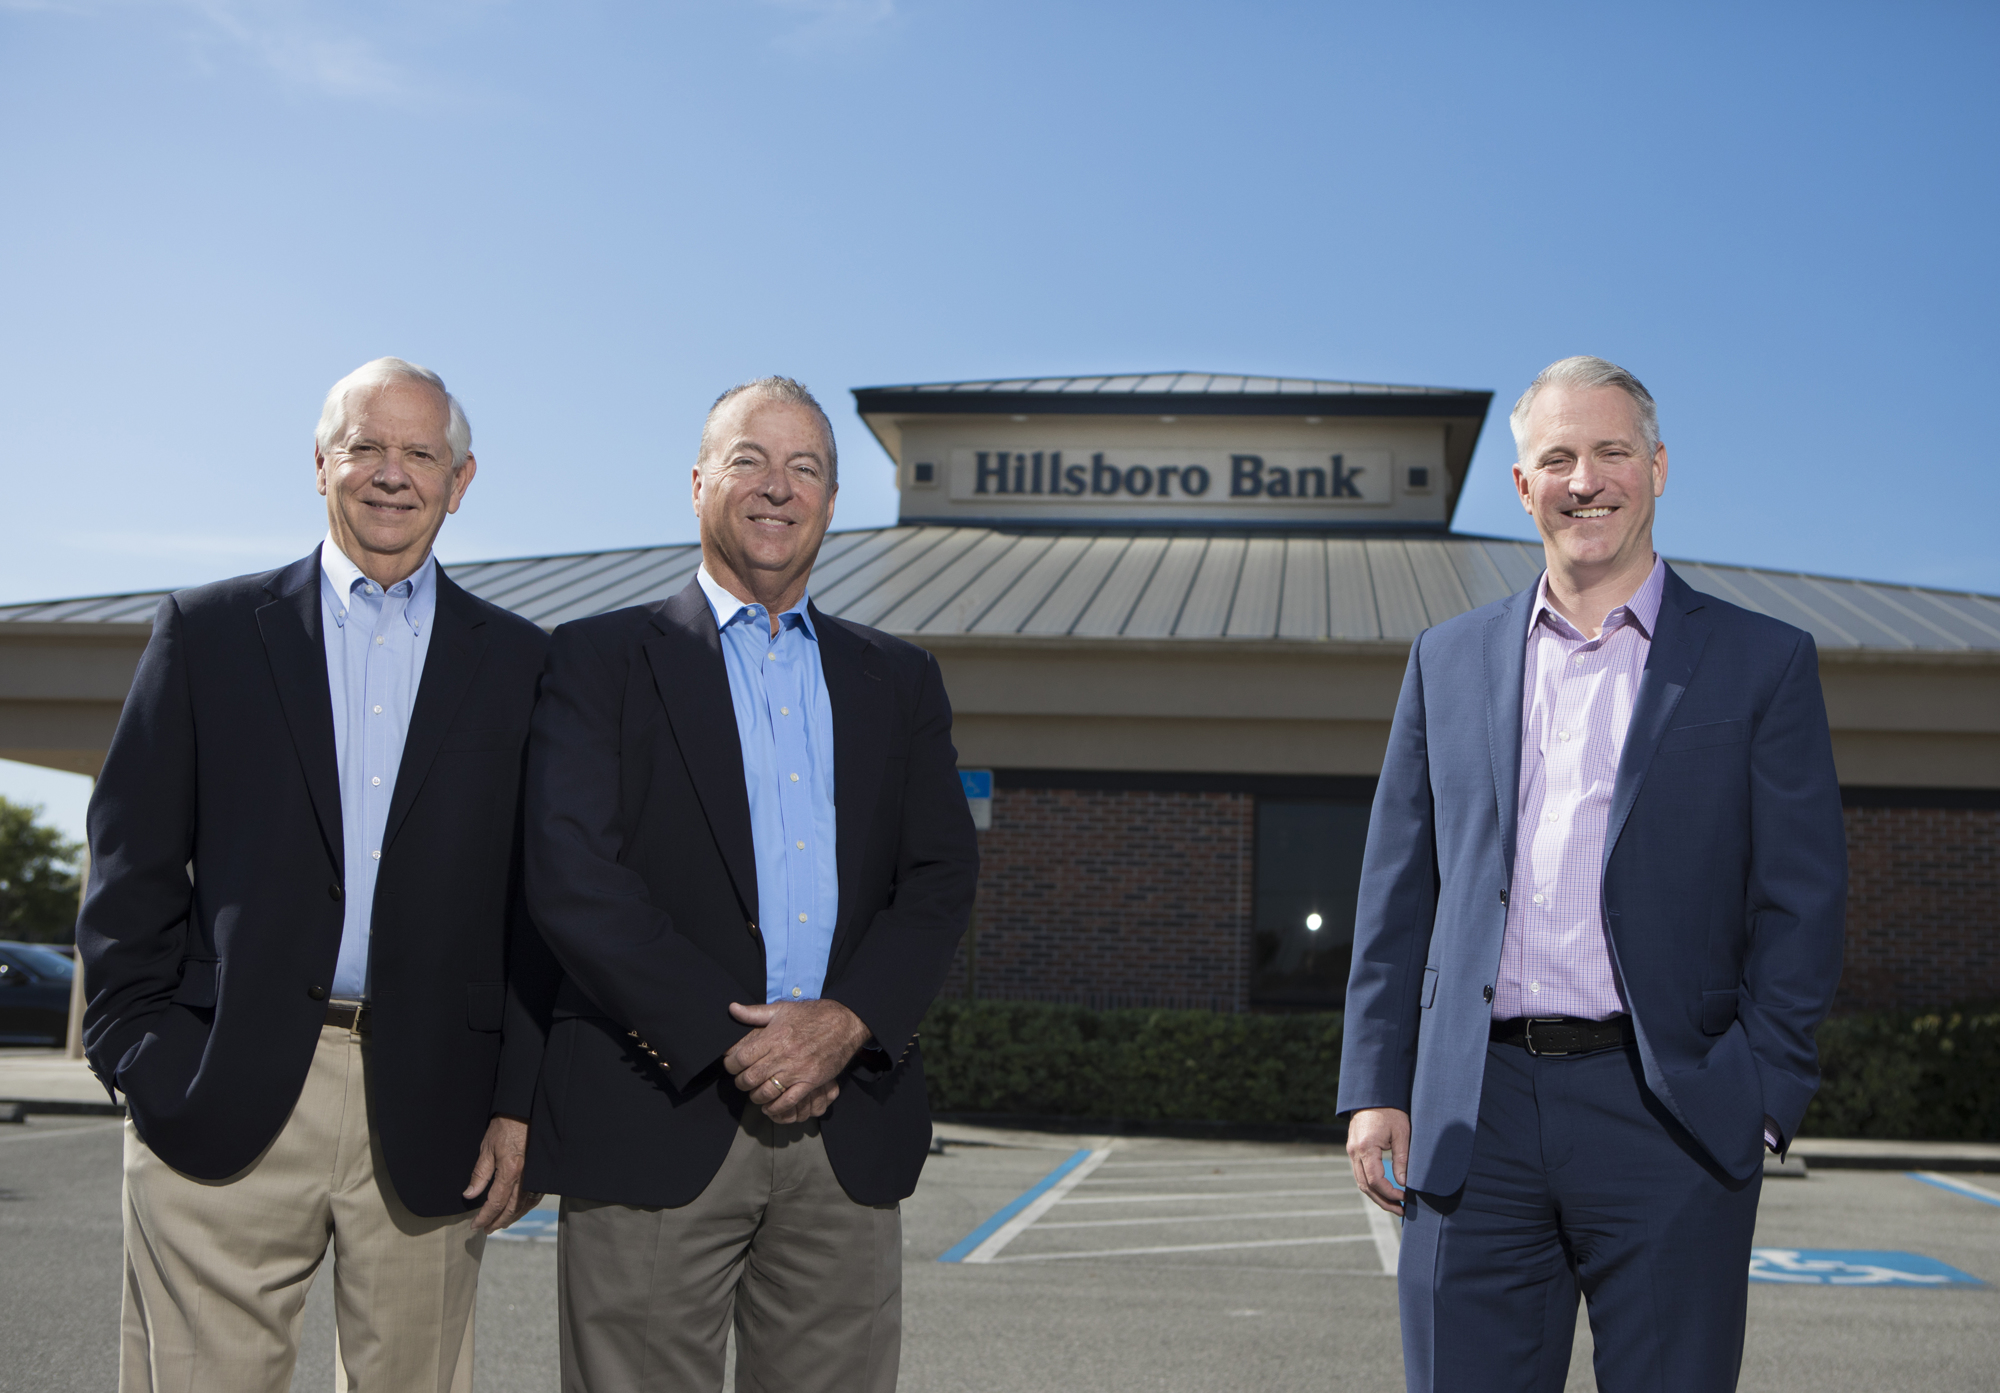 Wemple. Bank of Tampa's Bill West, far left, and Corey Neil, right, struck a deal with Mike Ward, center, to merge with Hillsboro Bank last year. It was the Bank of Tampa's first acquisition.